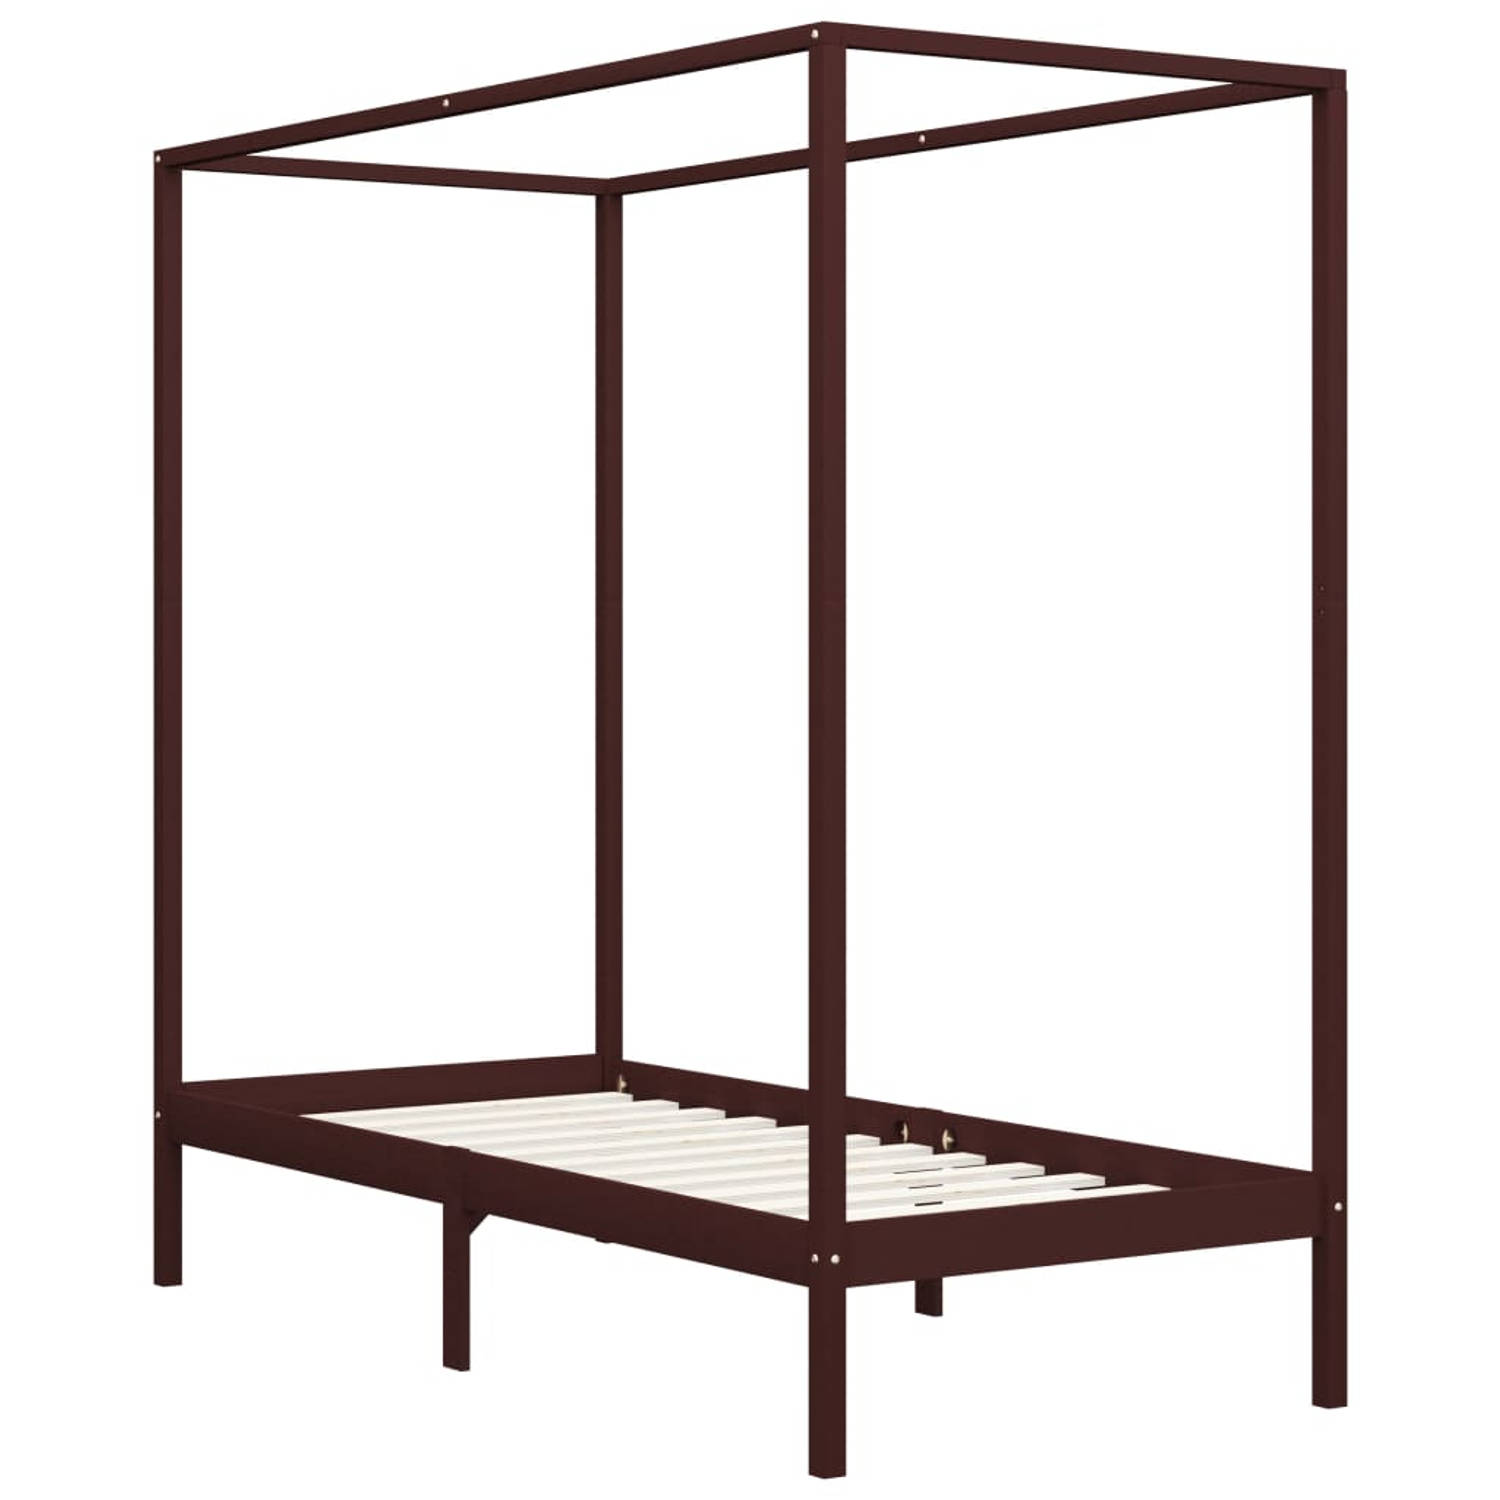 The Living Store Hemelbedframe - Massief hout - 204 x 104 x 200 cm - Donkerbruin